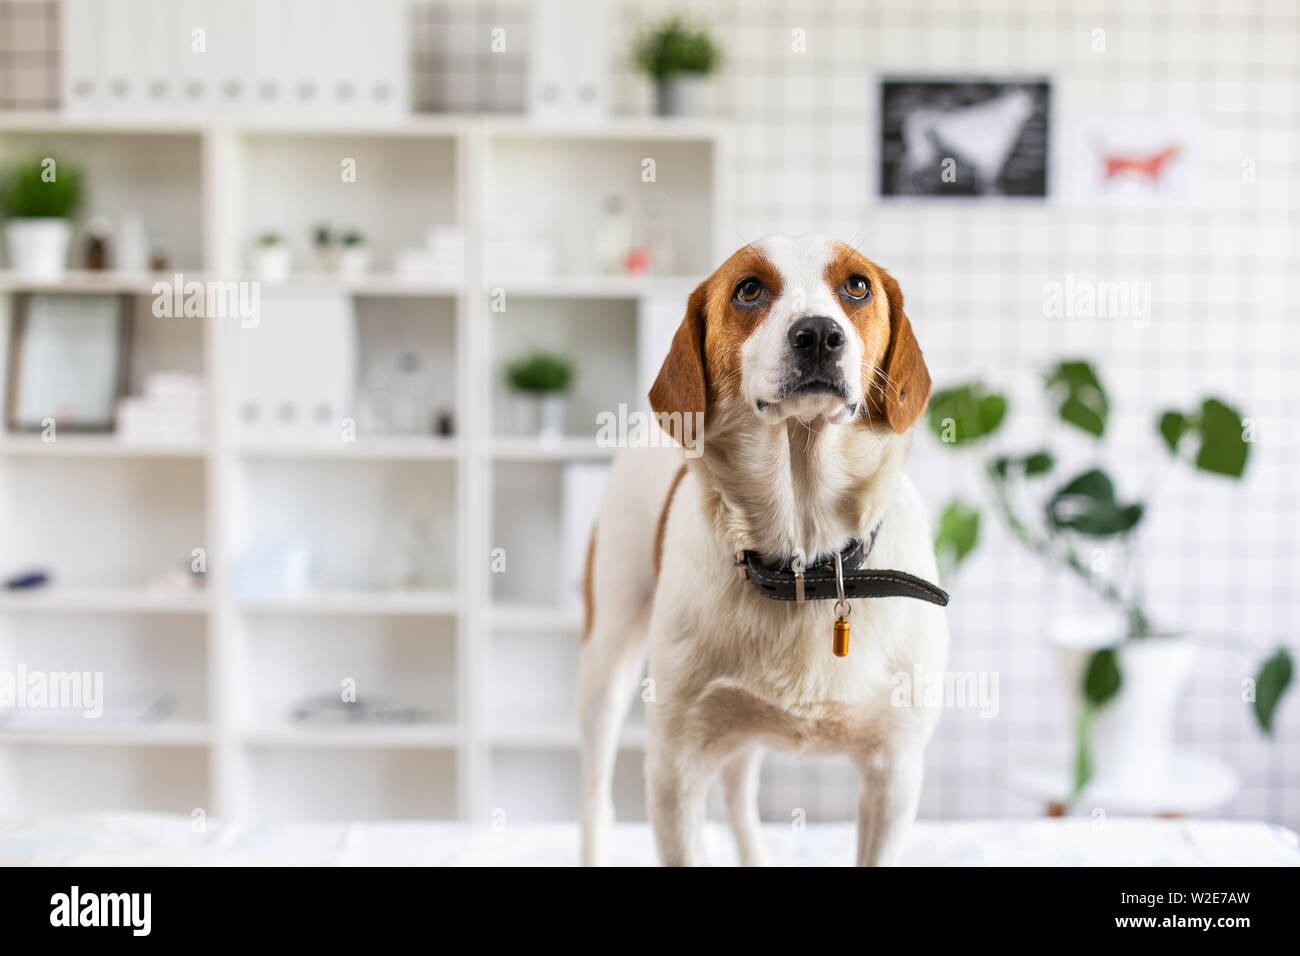 Dog waiting for a doctor in a veterinary clinic on the table. Blurred background of veterinary clinic. Stock Photo